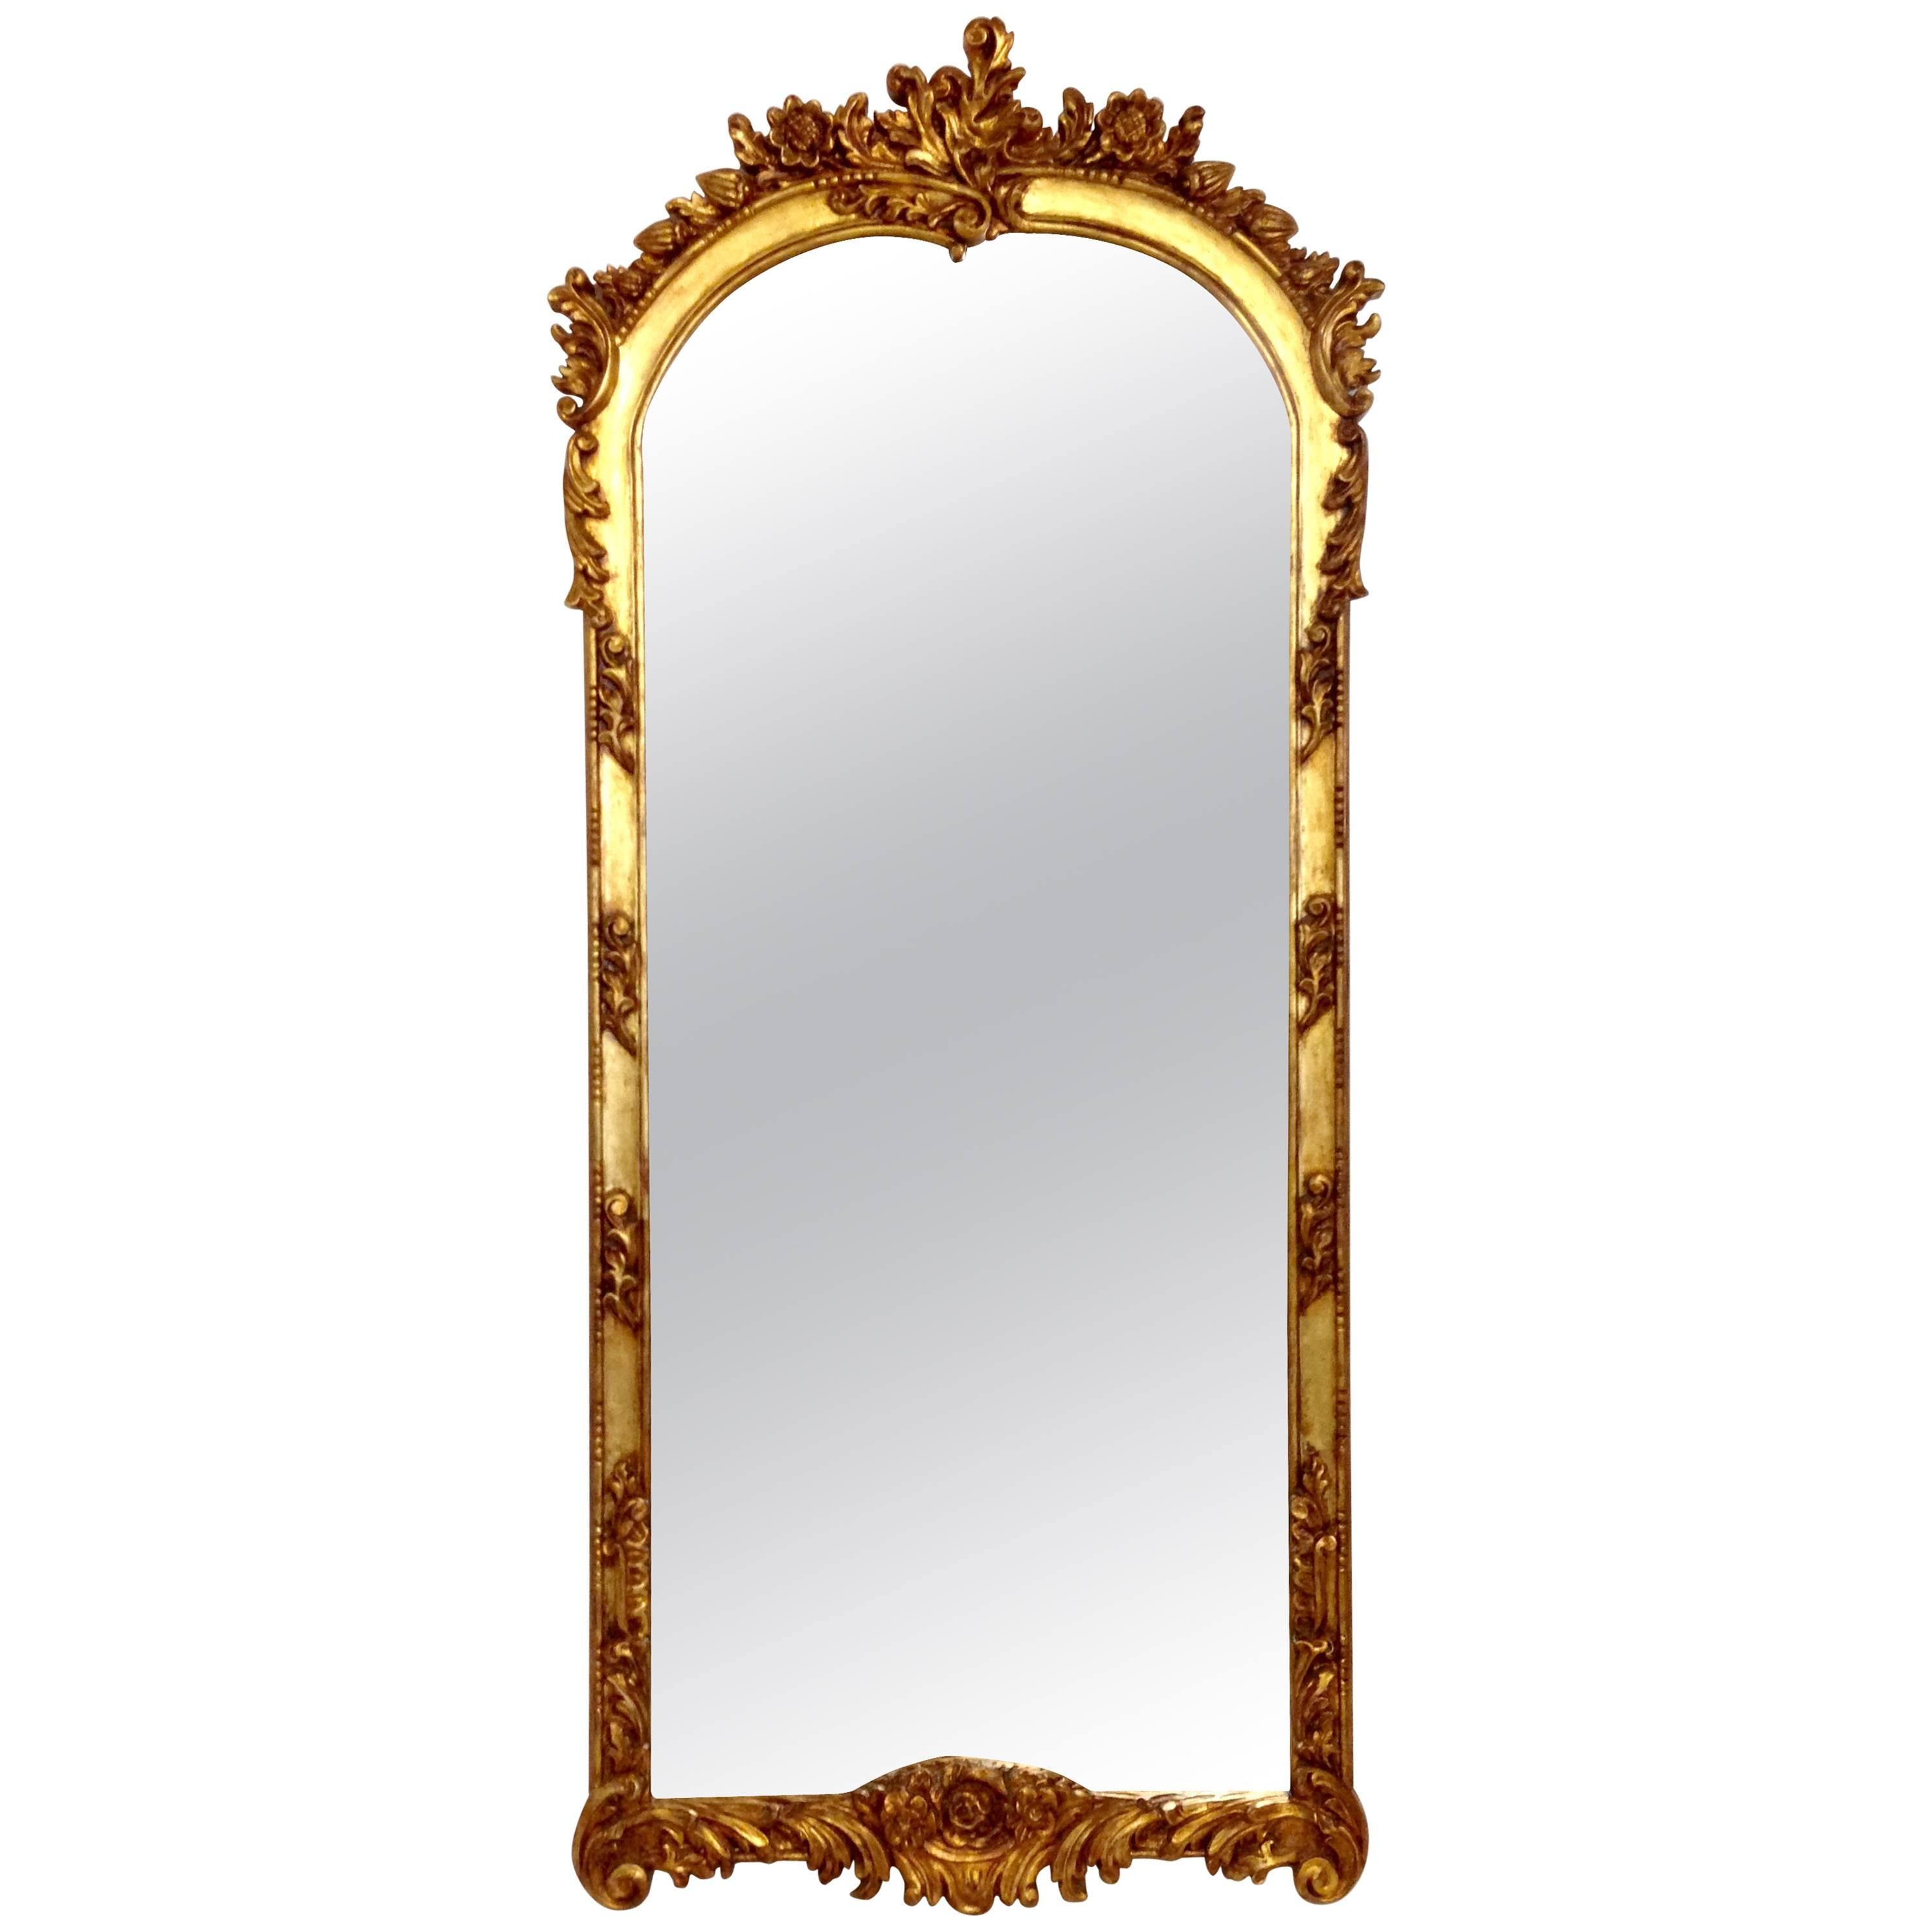 19th-Century Carved Giltwood Mirror